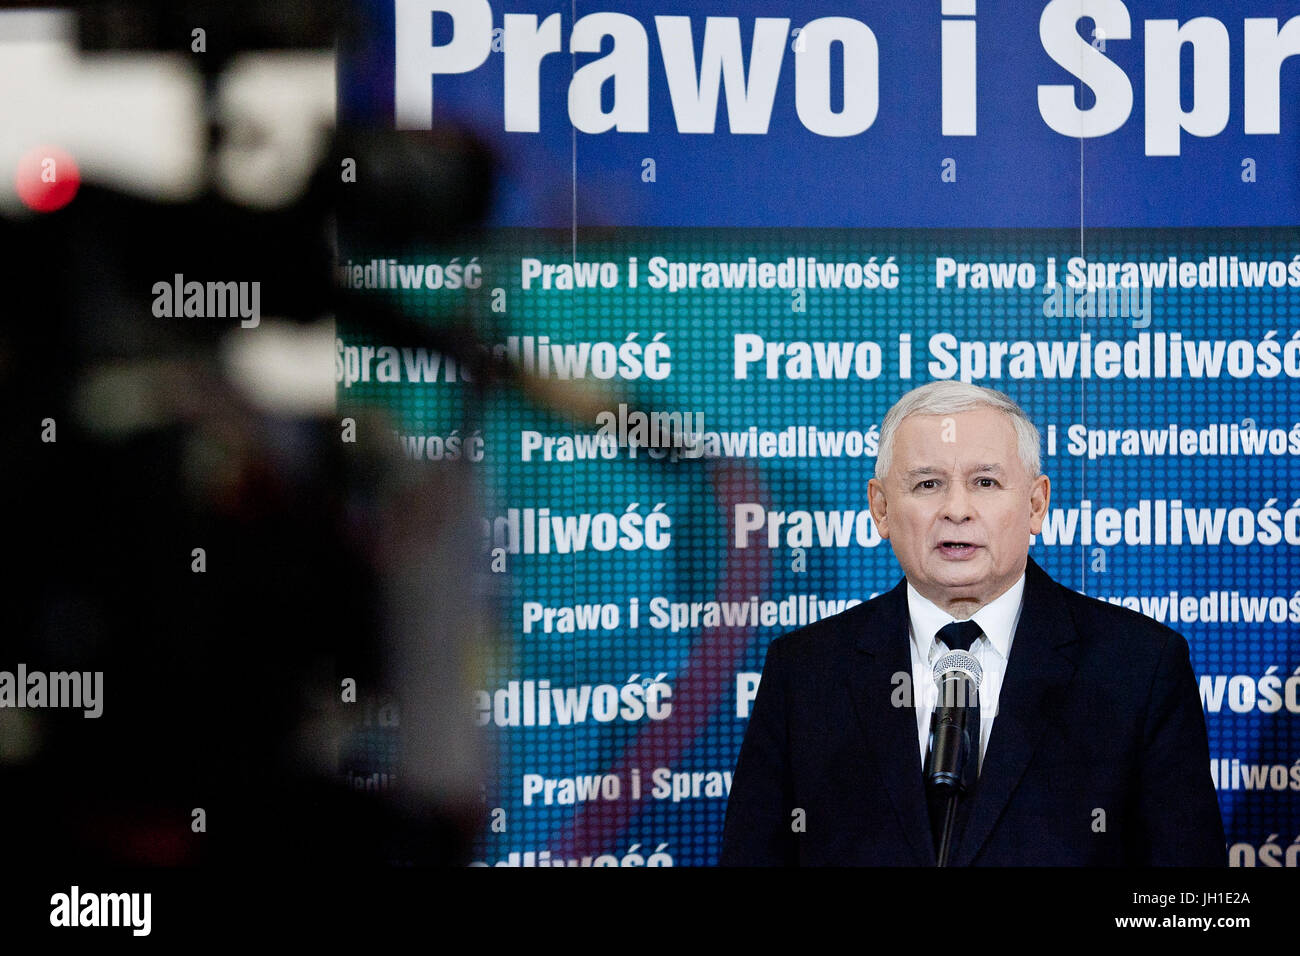 Jaroslaw Kaczynski in 2014, chairman of the right-wing Law and Justice party, Polish conservative politician, parliament member. Stock Photo